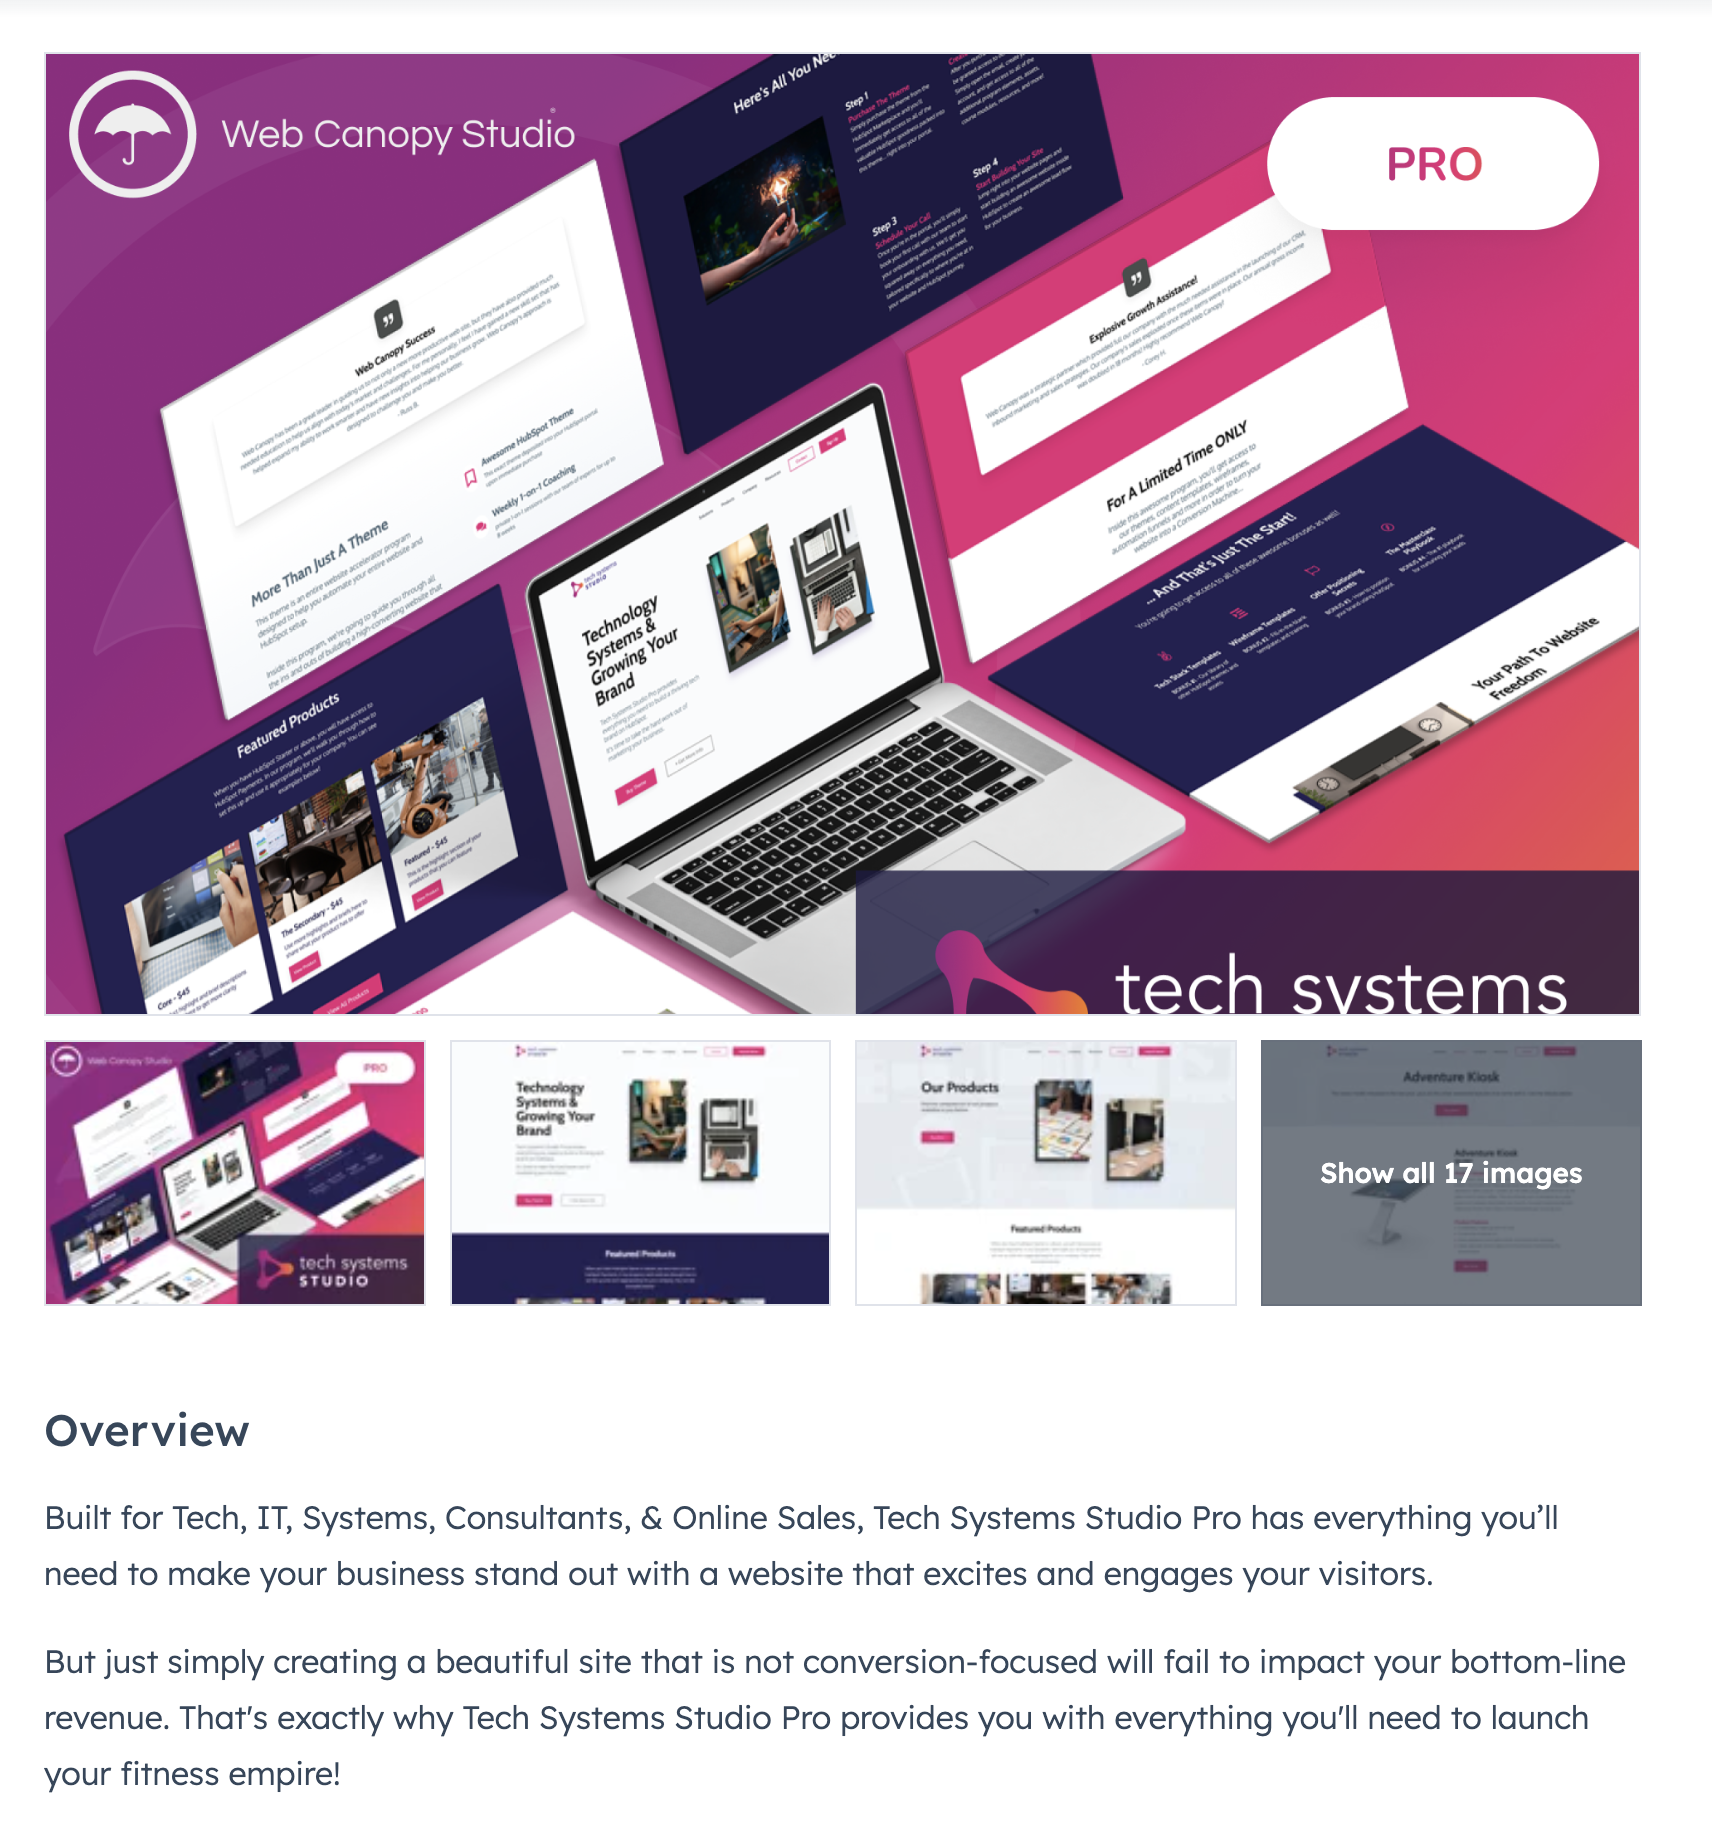 Listing page for the Tech Systems Studio Theme by Web Canopy Studio